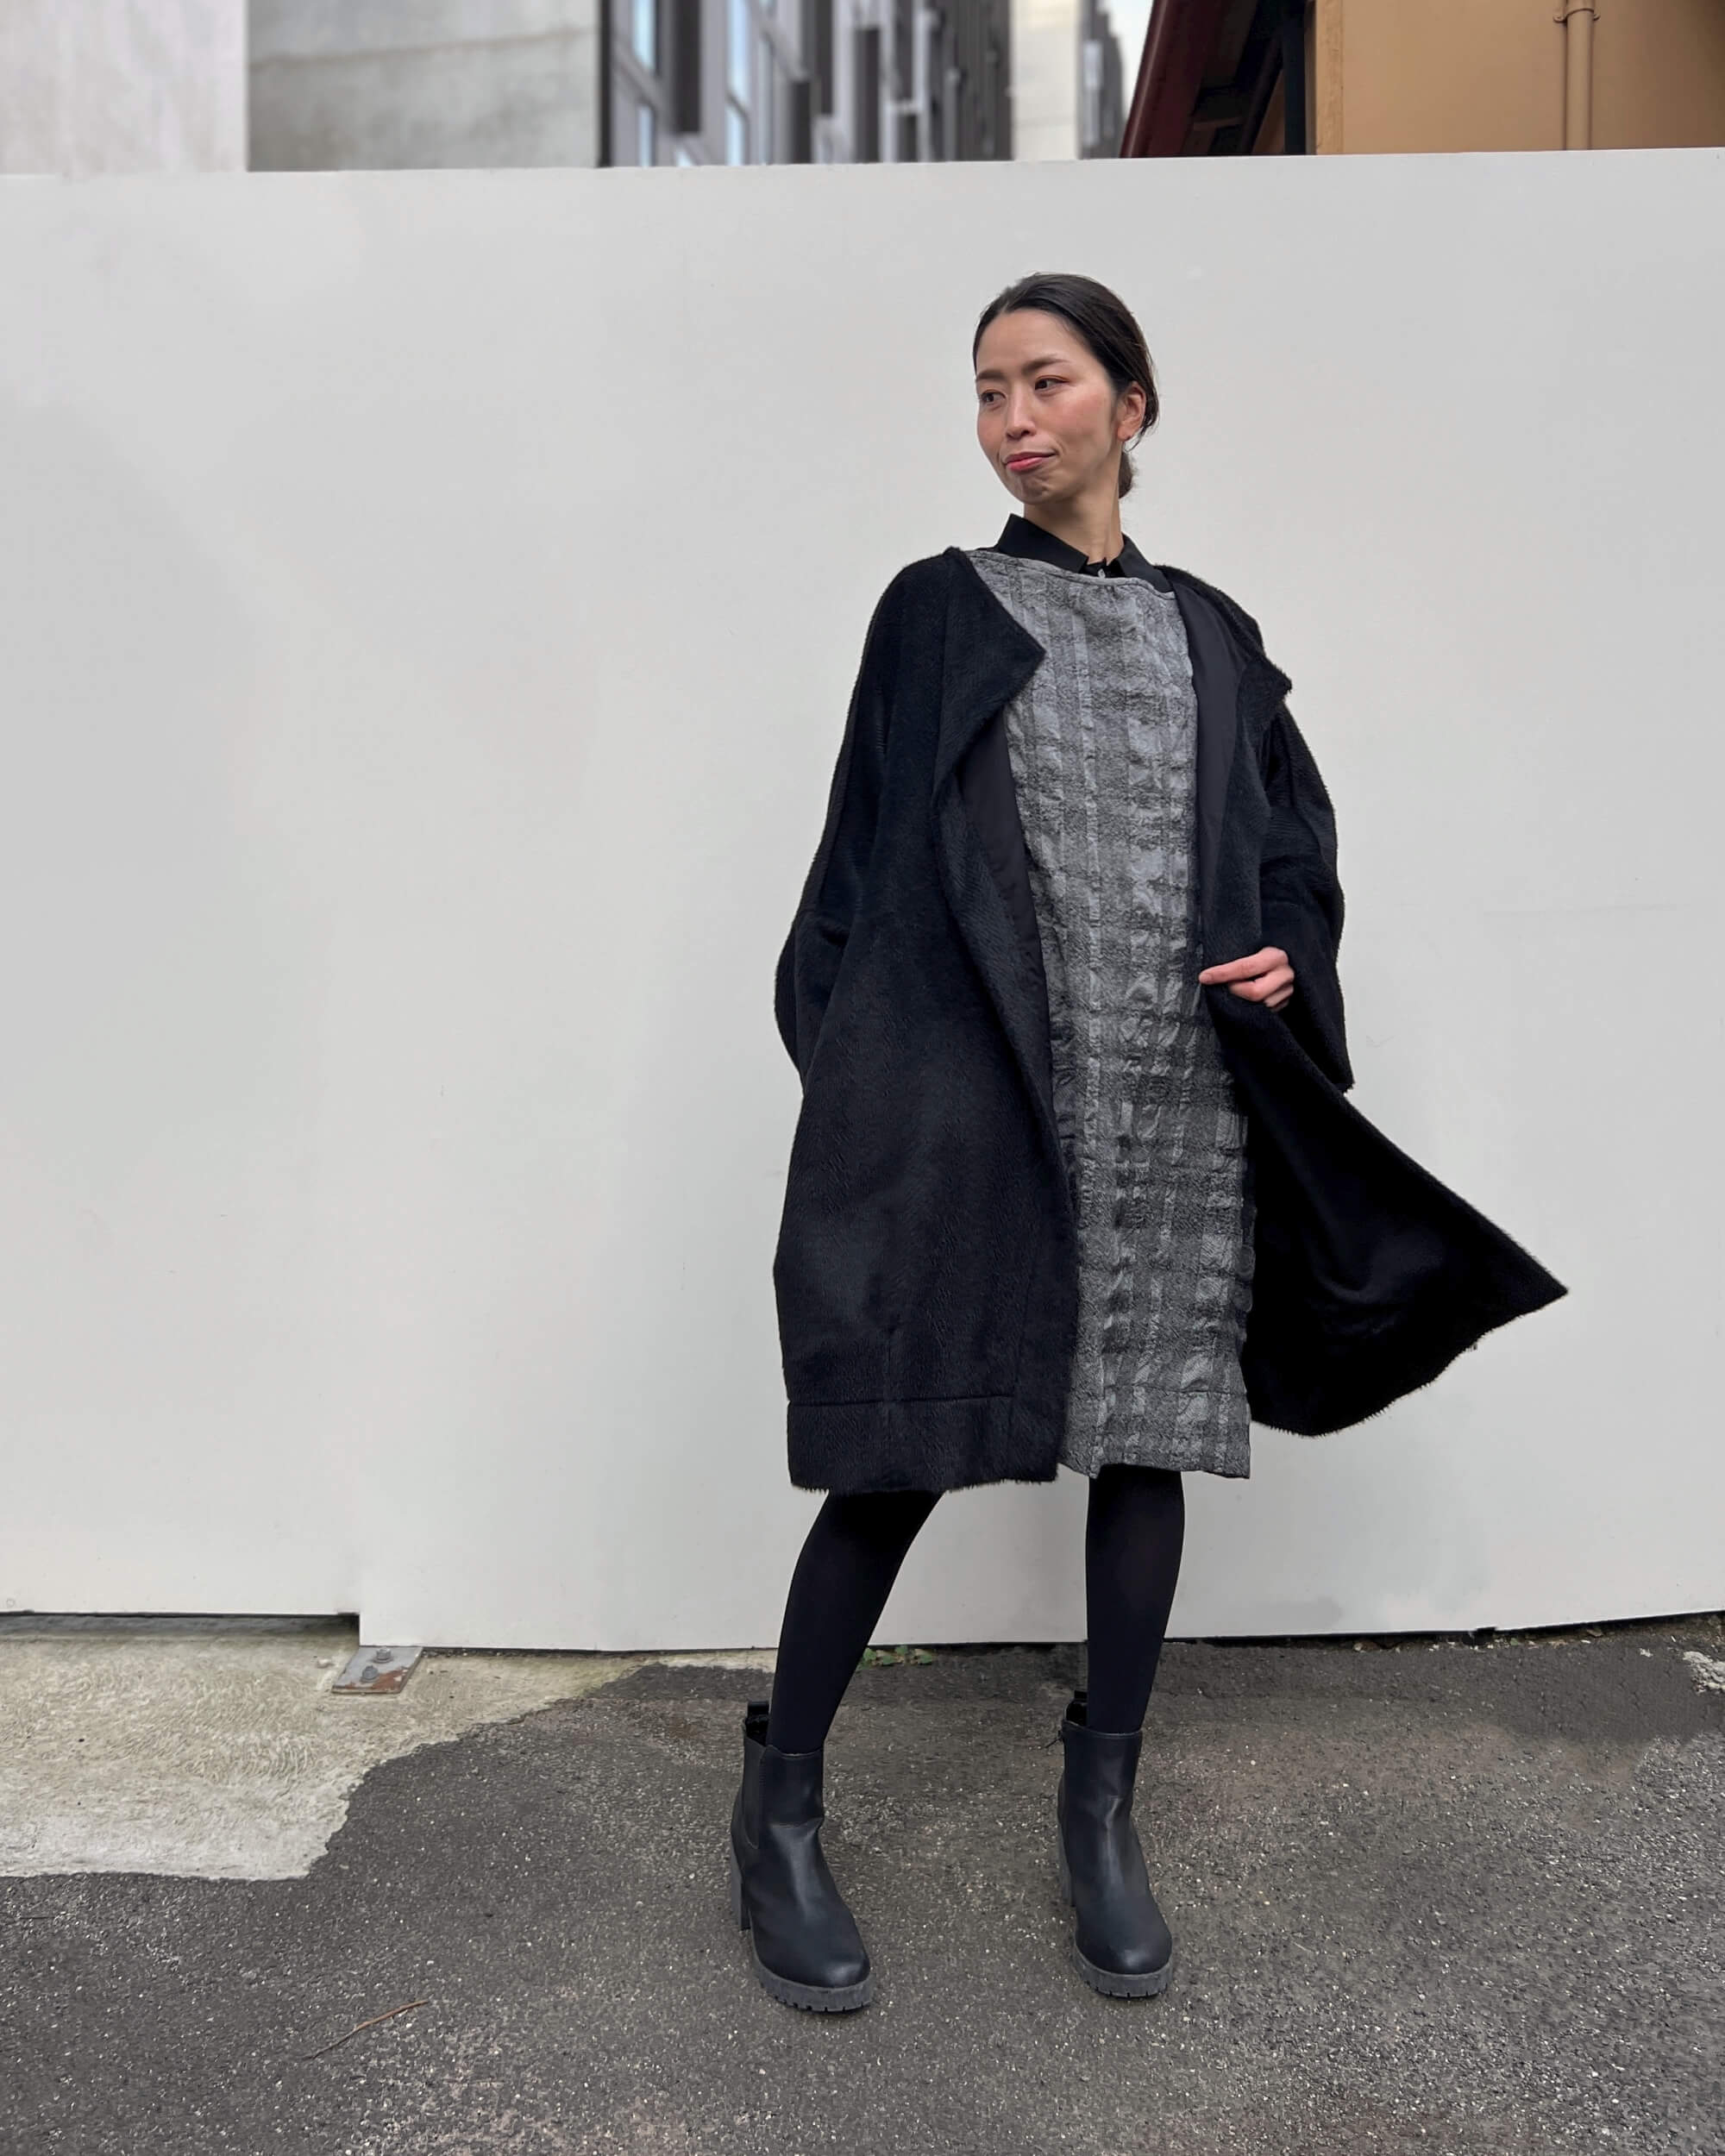 alpaca wool gallery coat designed by Leonie Struthers and made from Japanese fabric